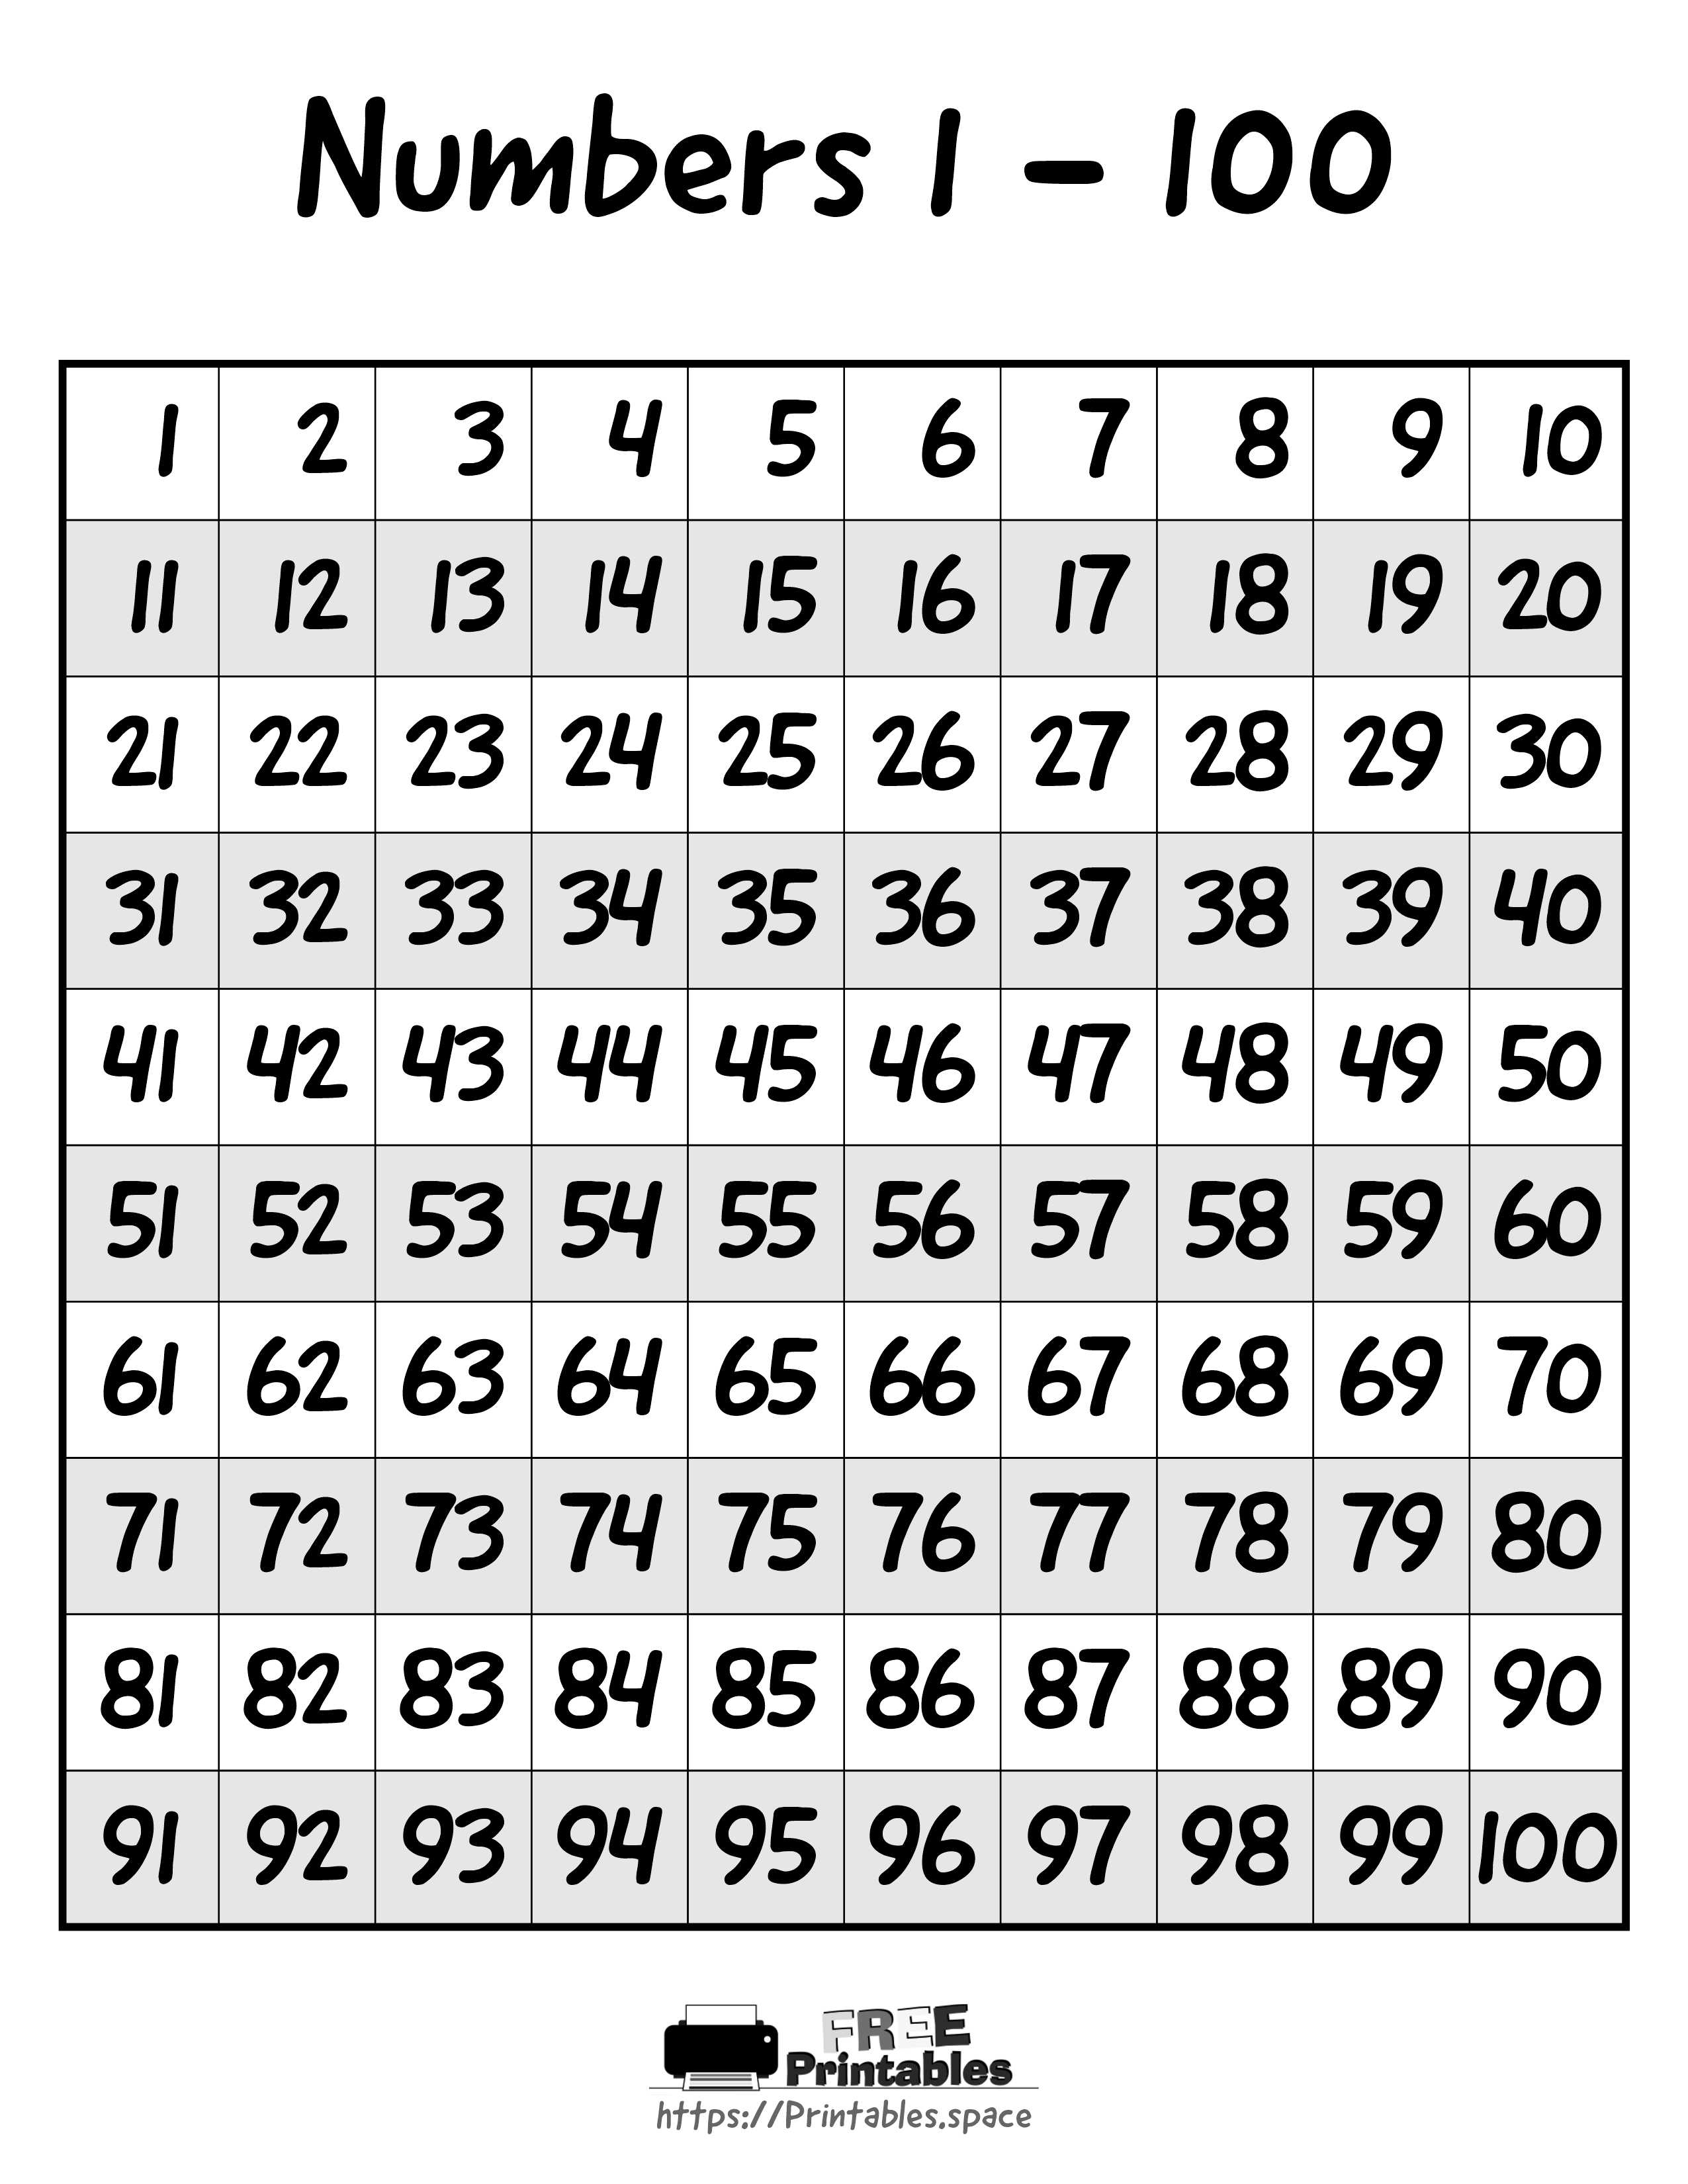 Printable Numbers 1 100 Image Result For Free Printable Number Chart Images